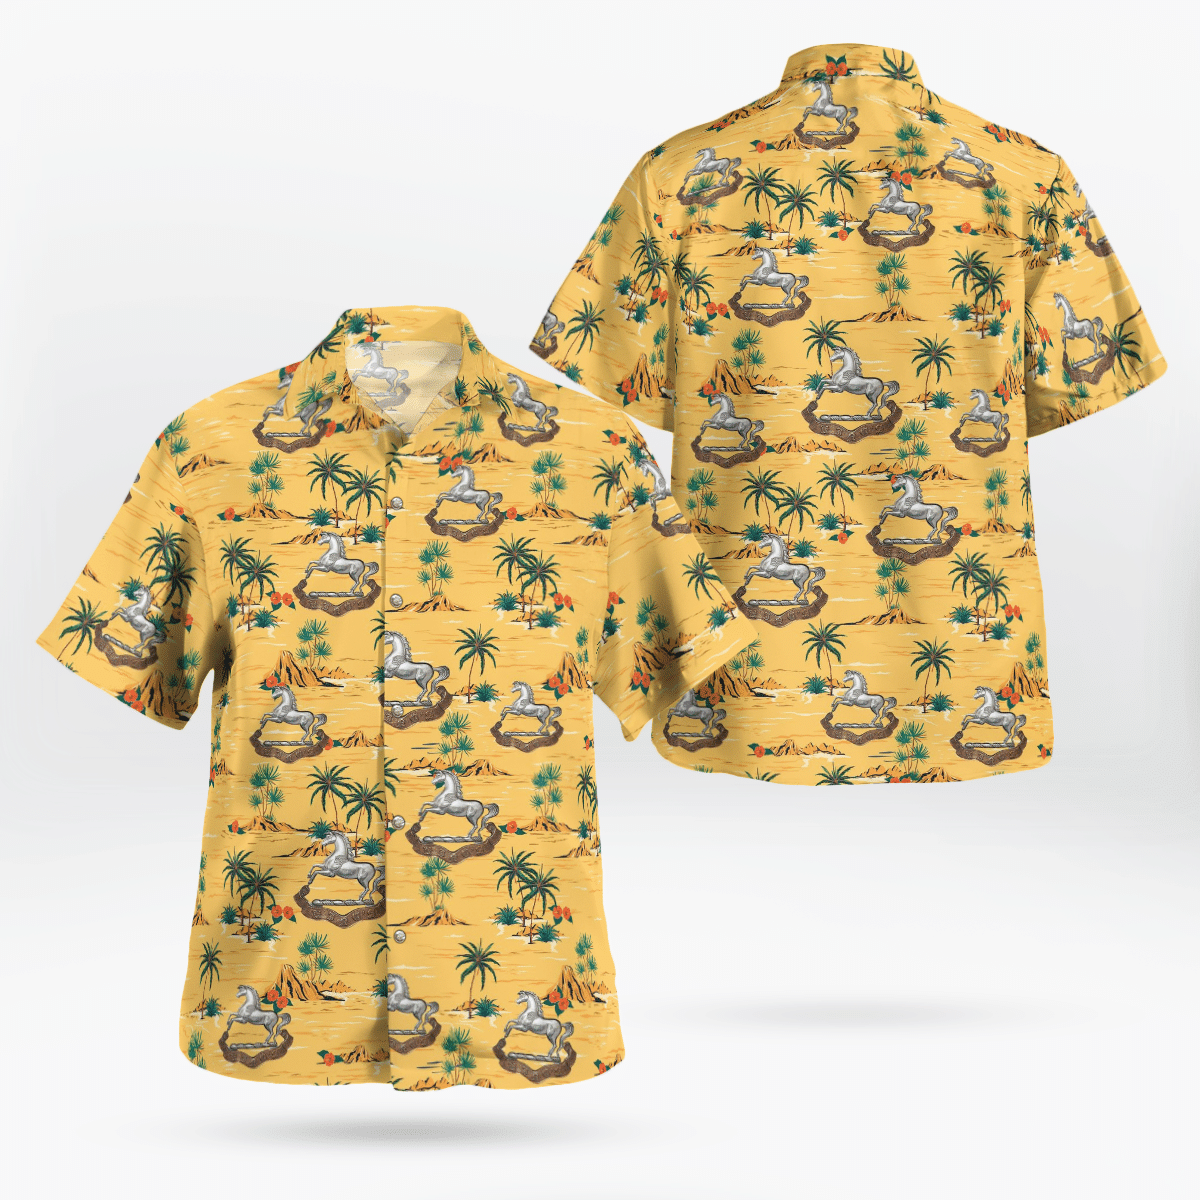 Shop now to find the perfect Hawaii Shirt for your hobby 80